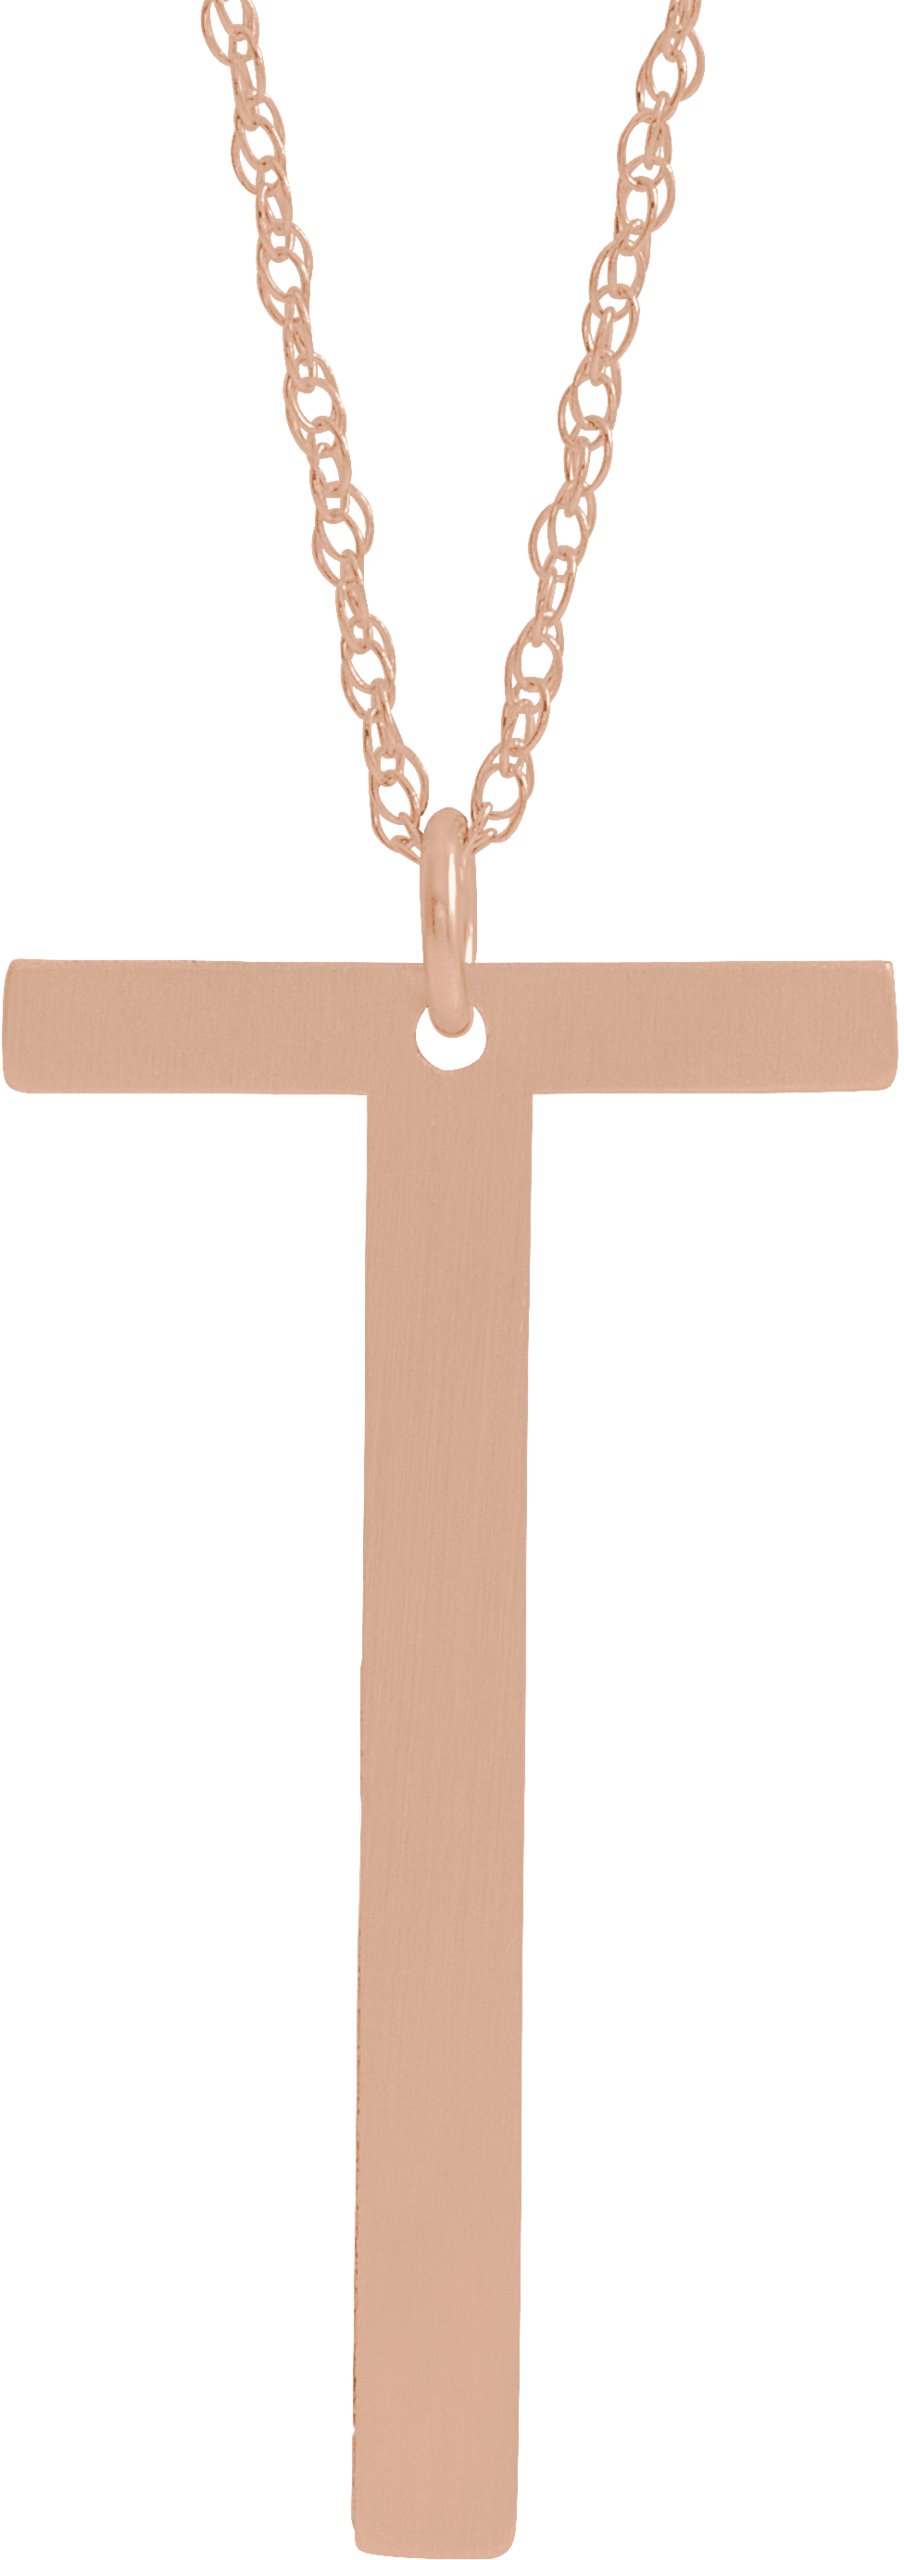 14K Rose Gold-Plated Sterling Silver Block Initial T 16-18" Necklace with Brush Finish